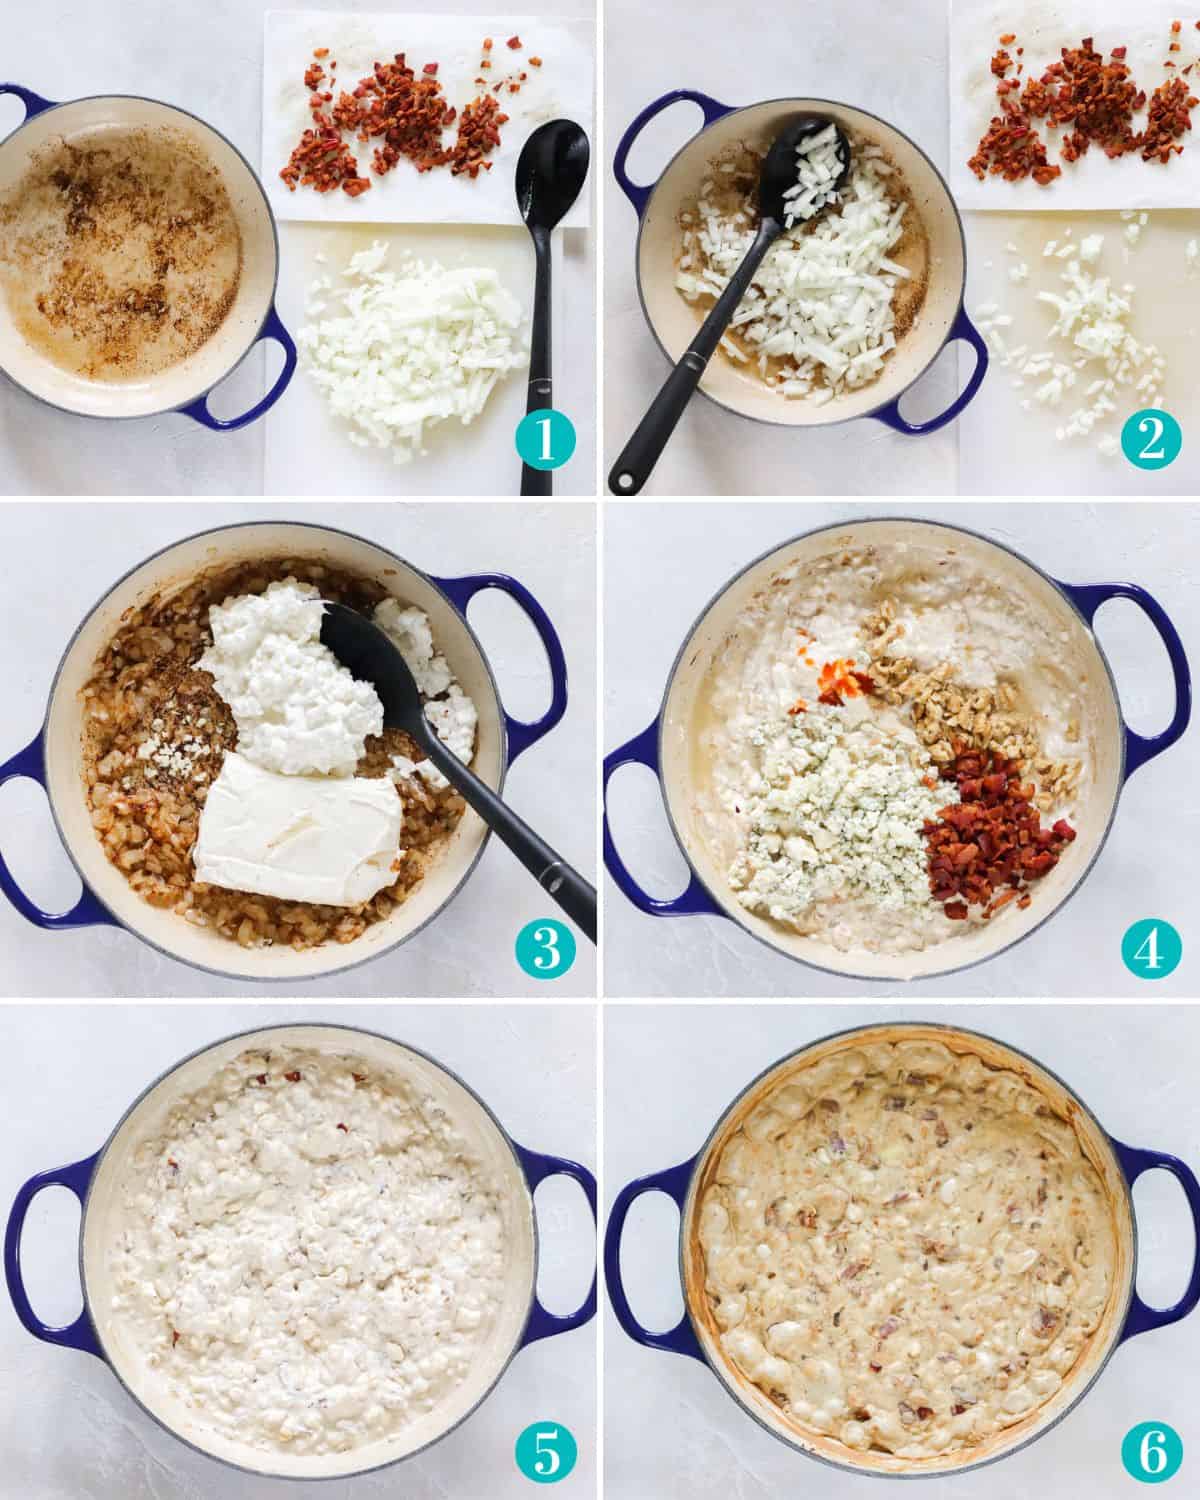 six photo collage with steps to make blue cheese and bacon dip including cooking the bacon, sauteing the onion in bacon grease, adding cream cheese and cottage cheese, adding walnuts plus blue cheese and hot sauce, stirring it together, and baking.